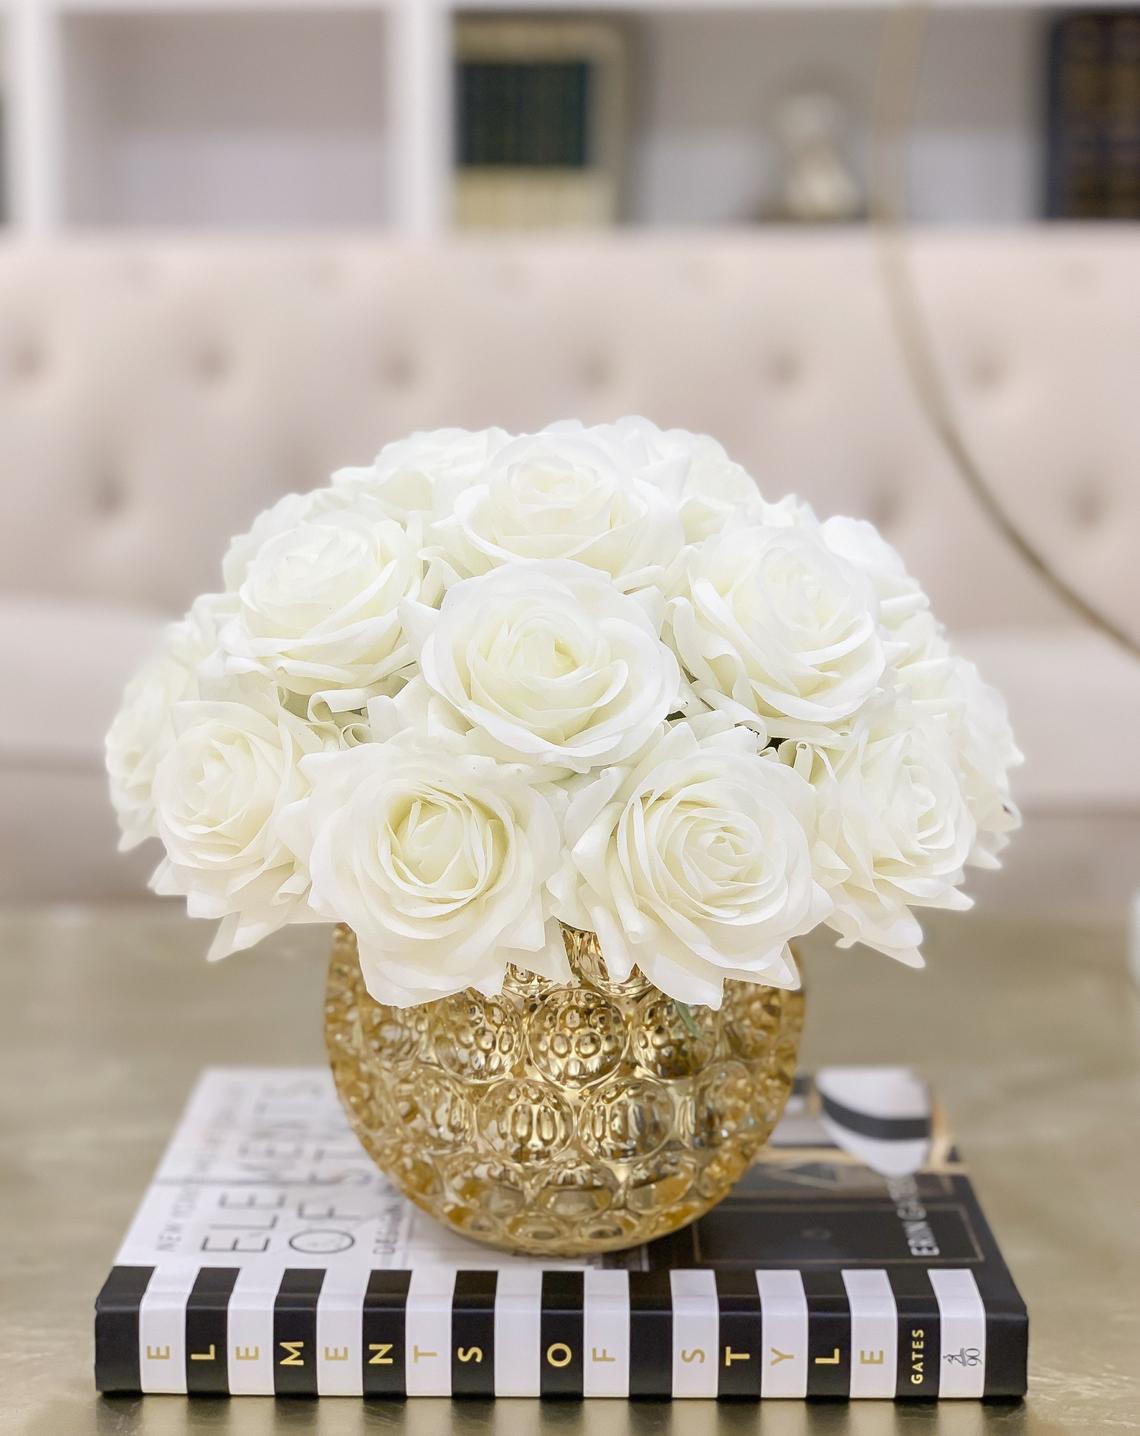 Large Rose Centerpiece in Gold Vase - Flovery